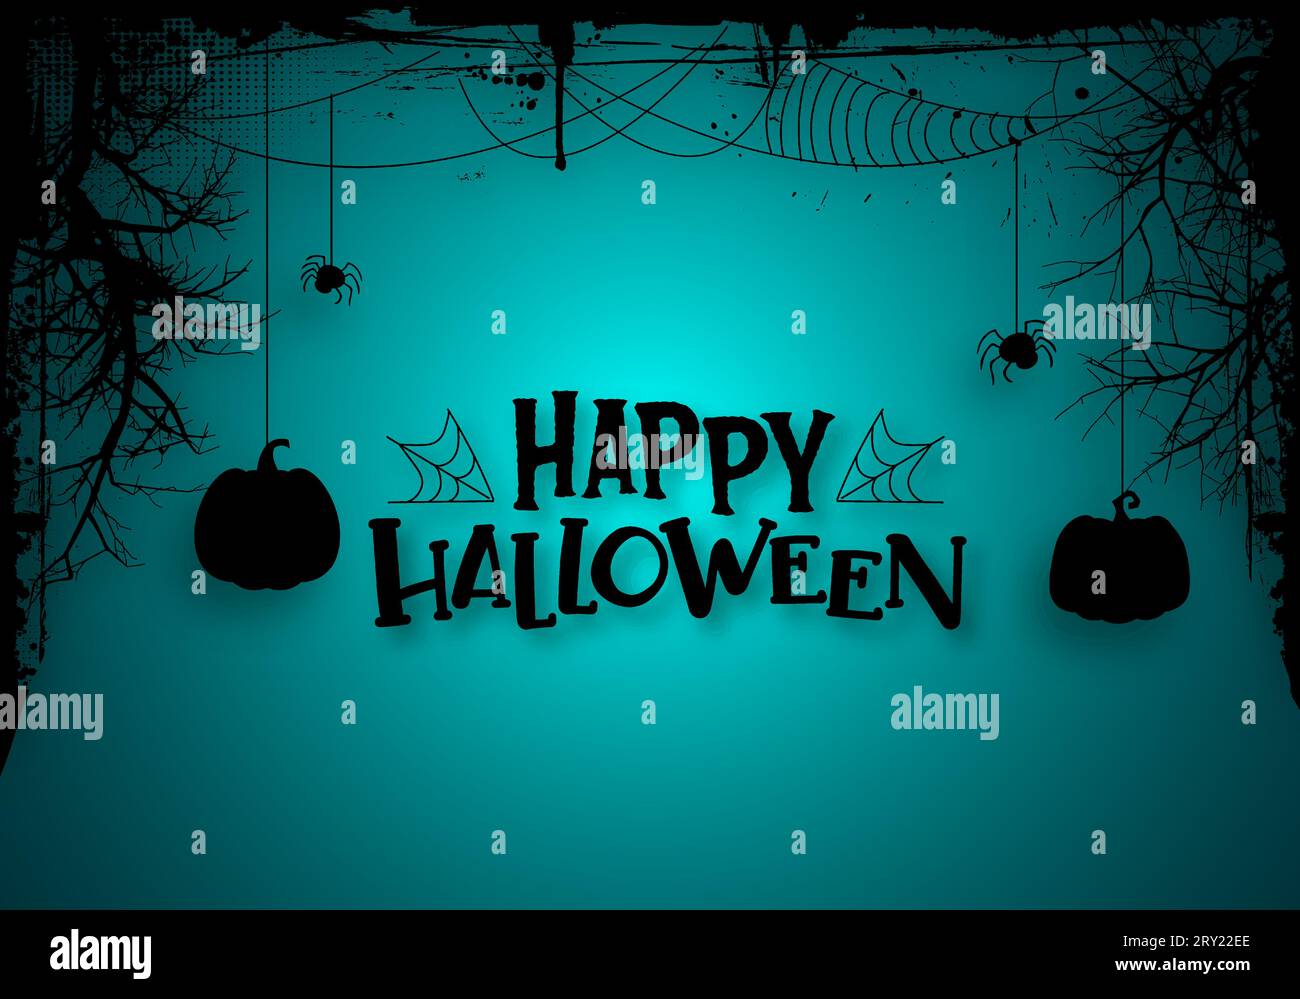 Happy halloween background with grunge border and creepy dead tree with spider webs Stock Vector